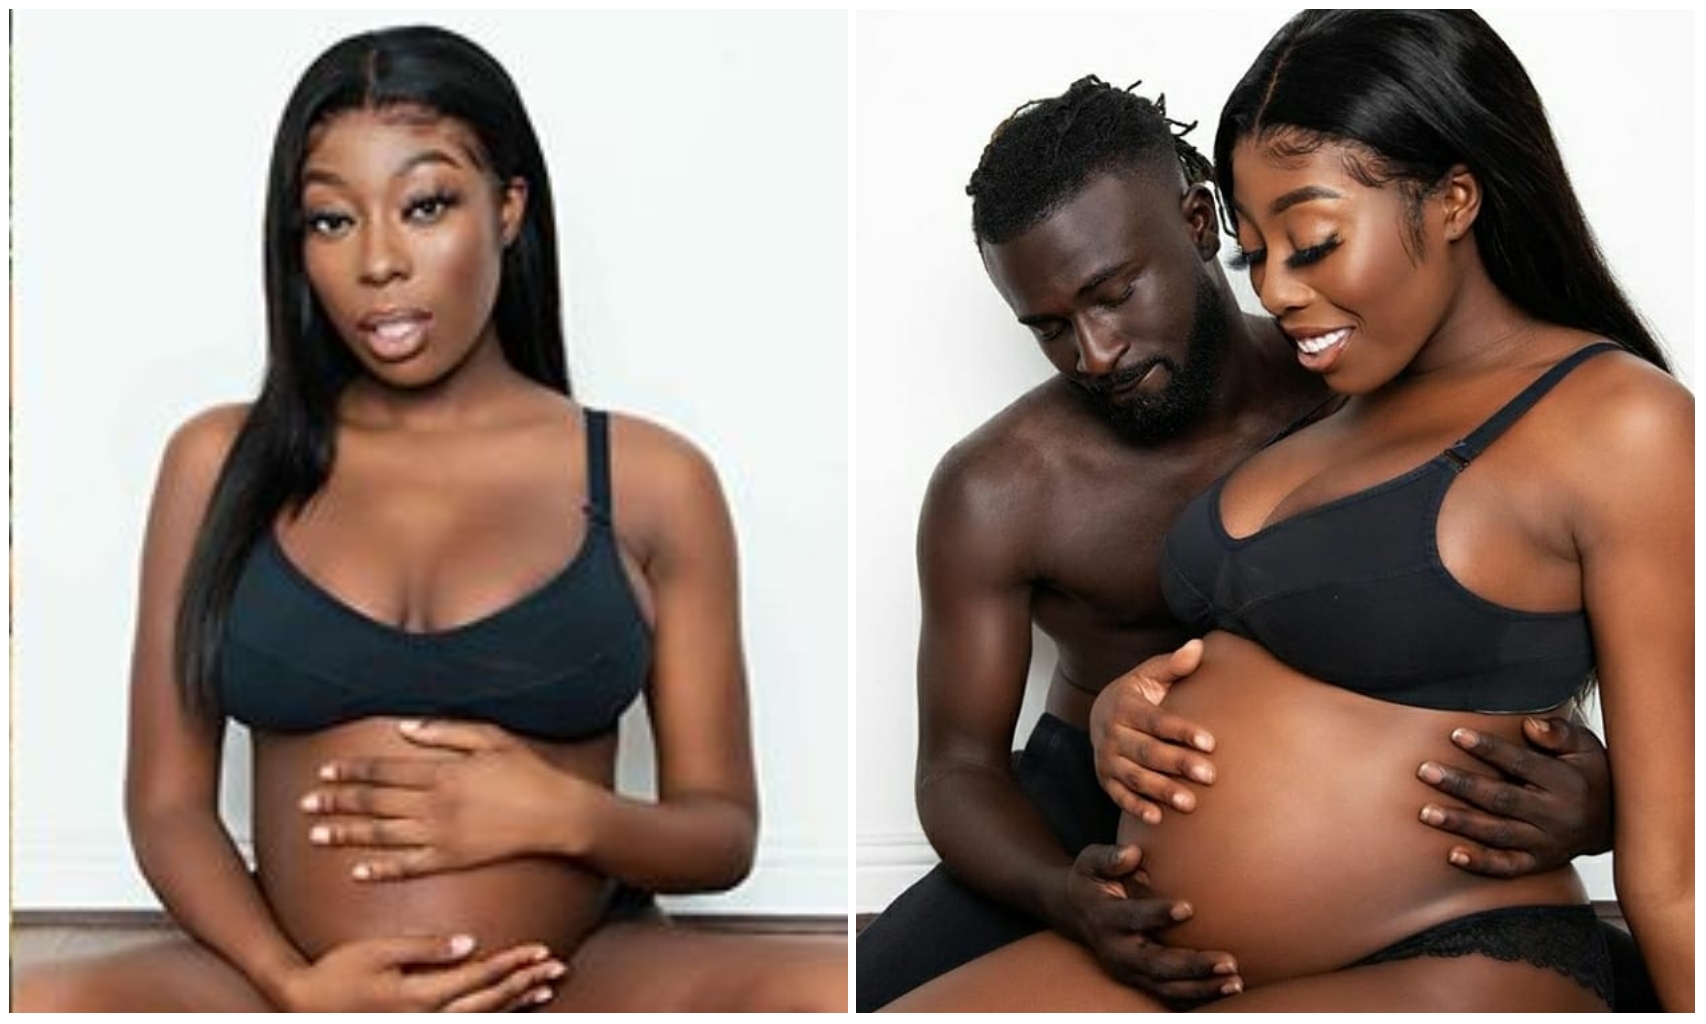 Pregnant Ghanaian YouTube Star Nicole Thea dies along with her Unborn Child